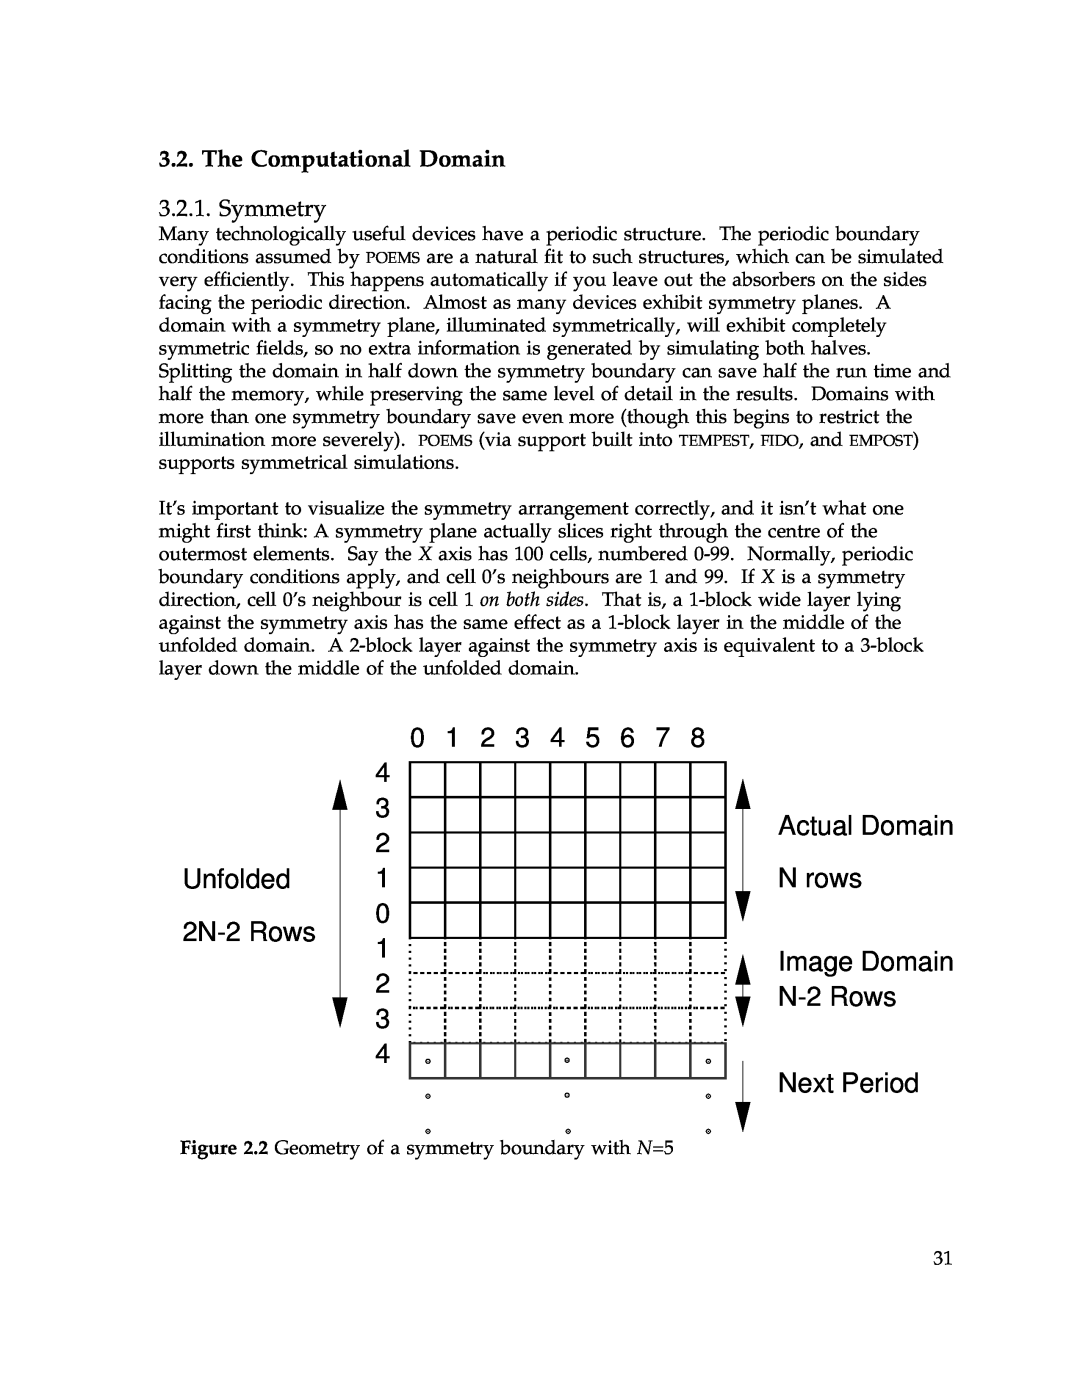 IBM Release 1.93 manual The Computational Domain, Symmetry, Unfolded 2N-2 Rows 